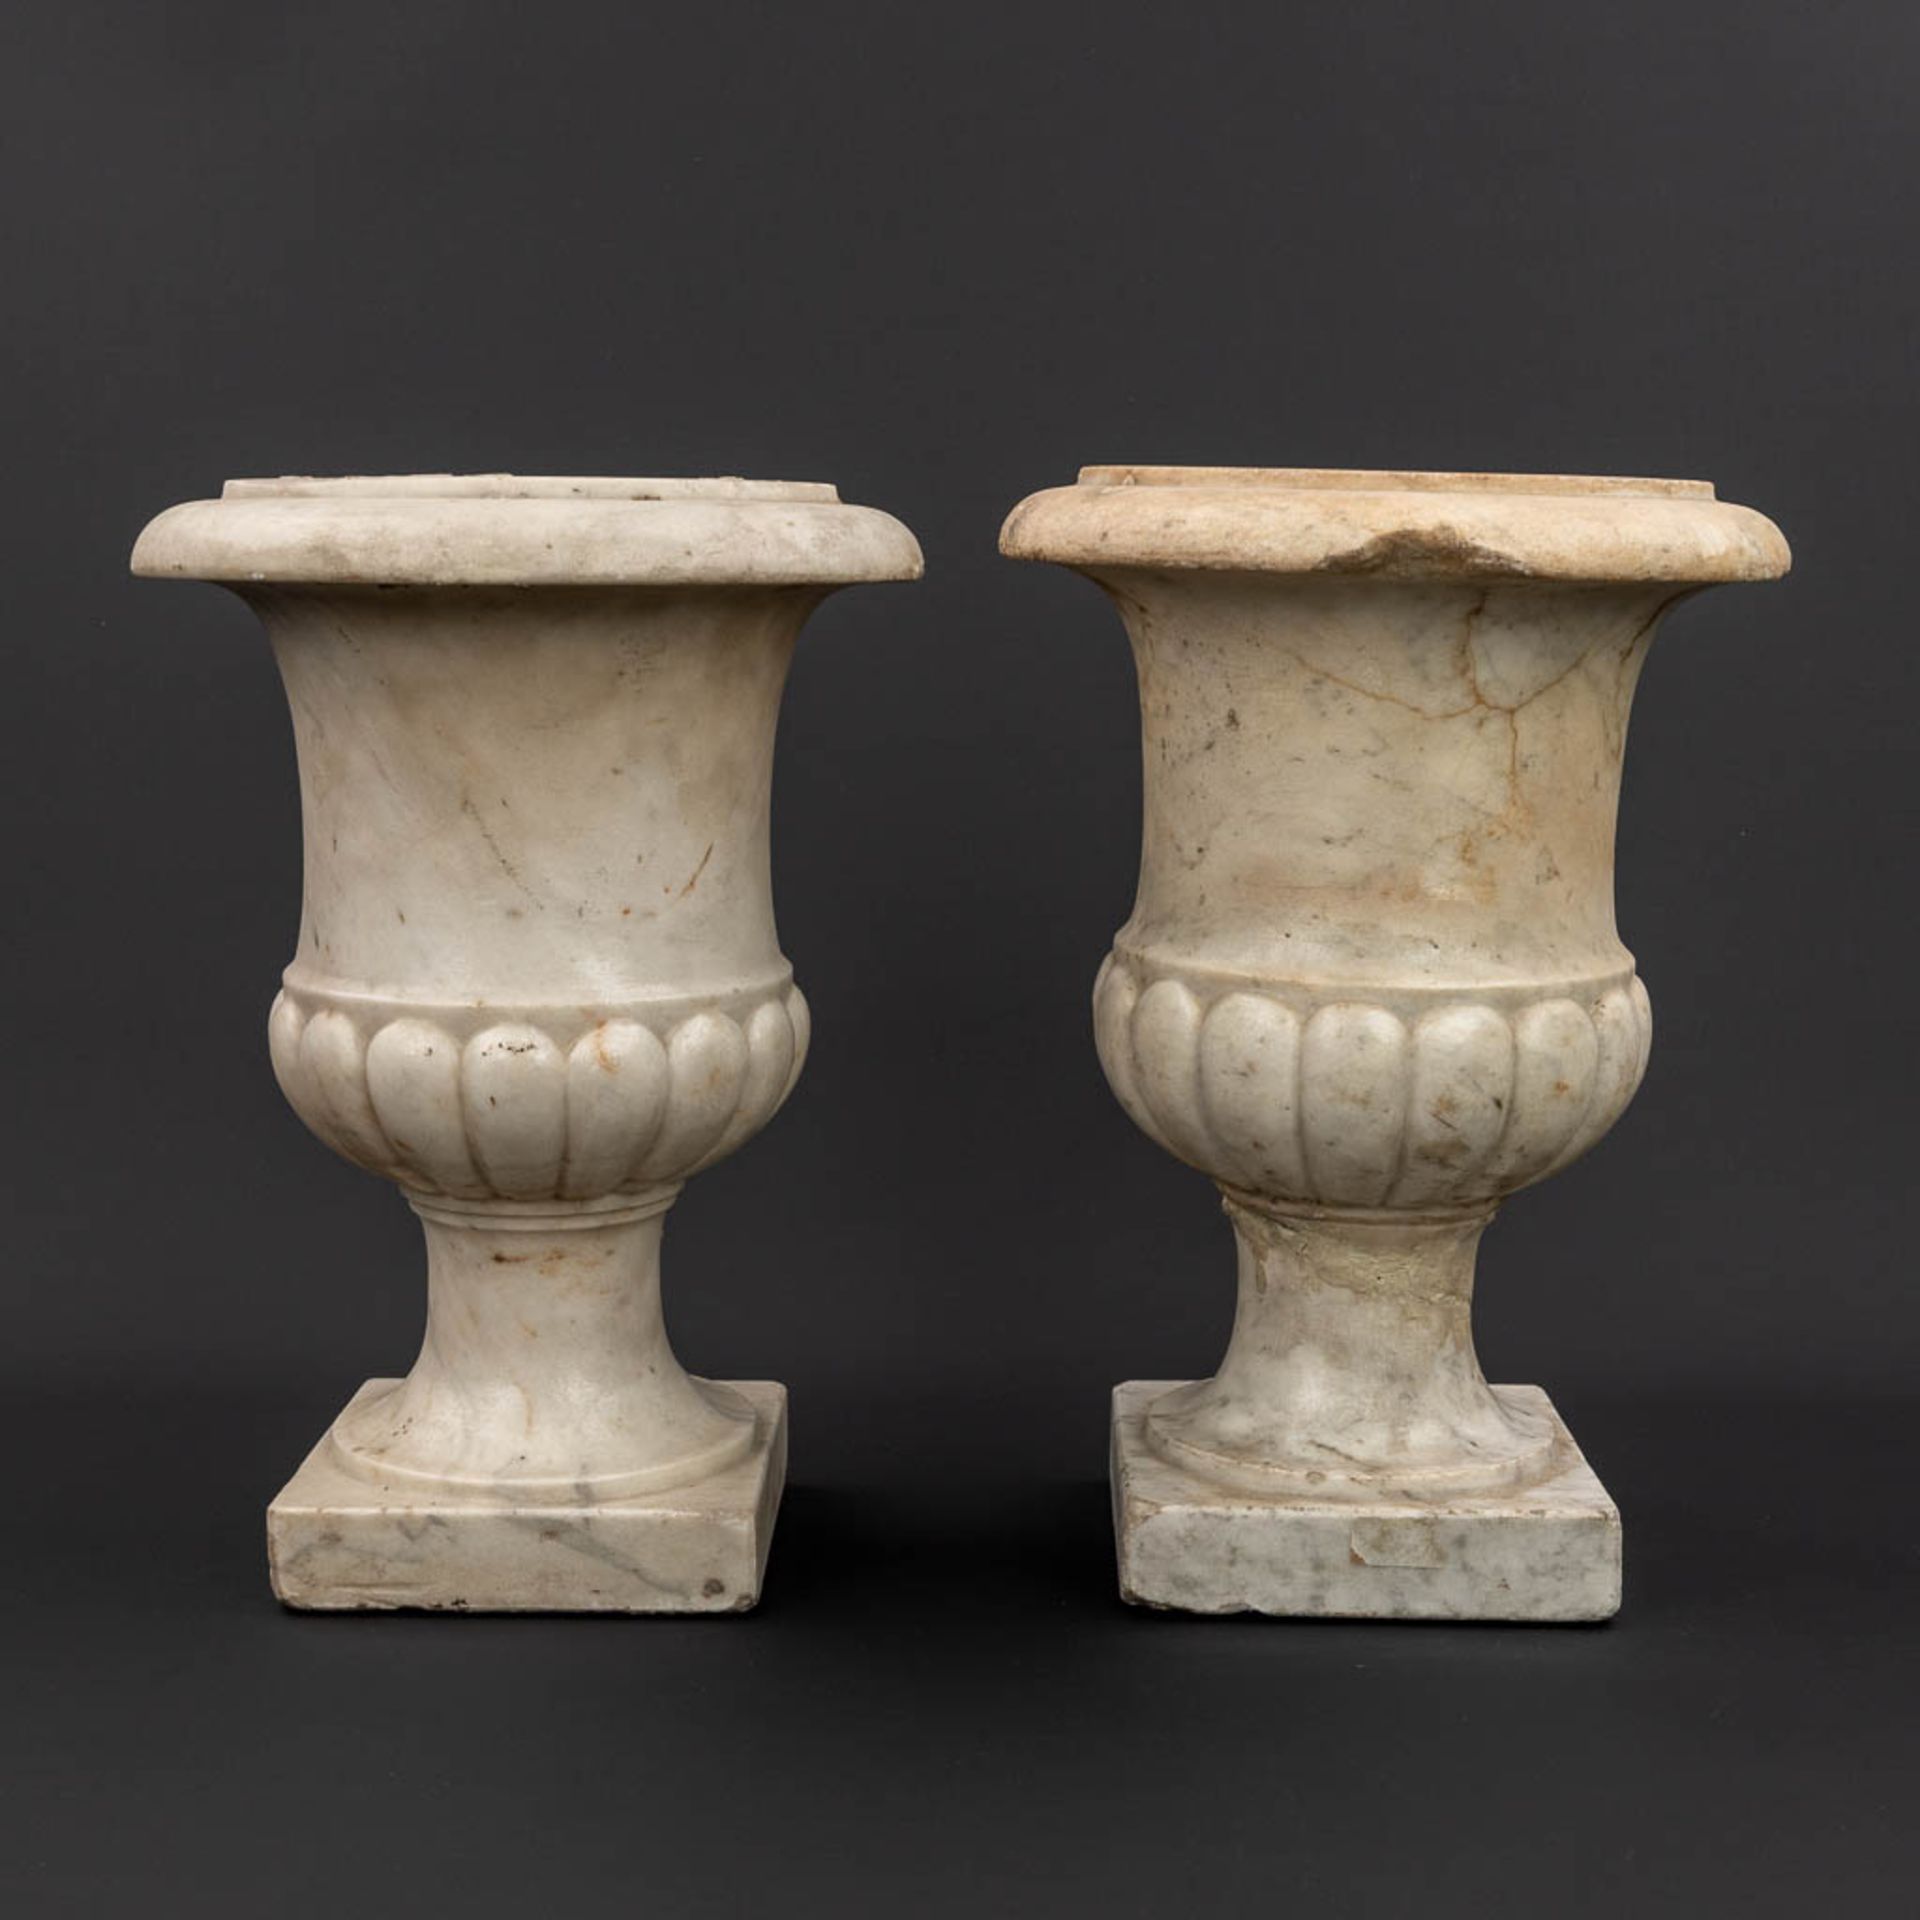 A pair of marble urns 'Medici Vases' made of sculptured marble, 18th C. (H:36 x D:26 cm) - Image 3 of 11